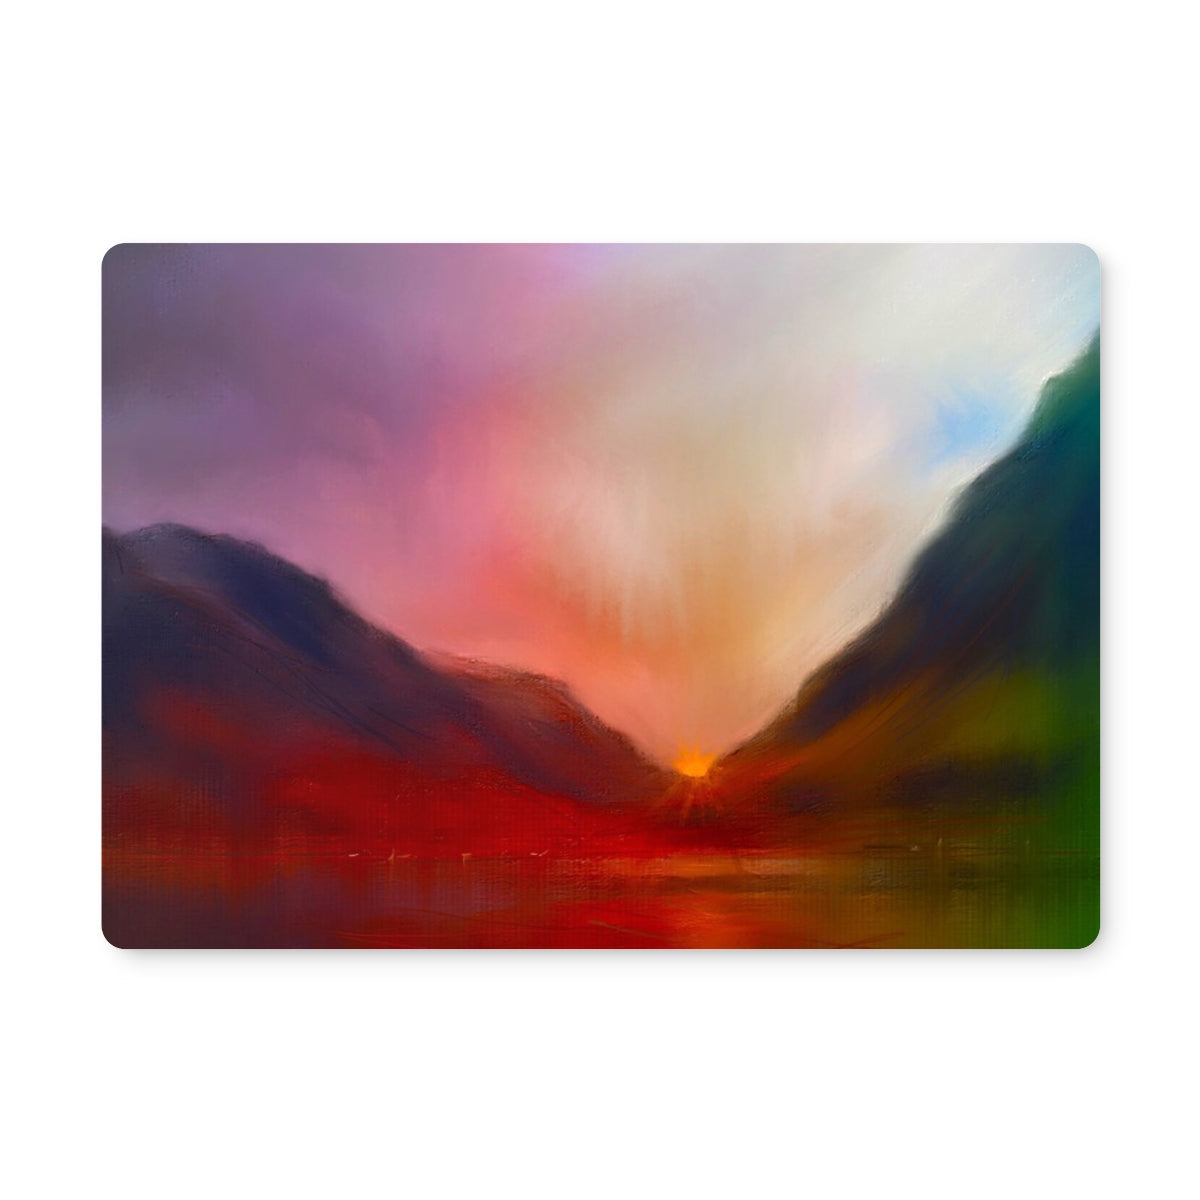 Glencoe Sunset Art Gifts Placemat-Placemats-Glencoe Art Gallery-6 Placemats-Paintings, Prints, Homeware, Art Gifts From Scotland By Scottish Artist Kevin Hunter